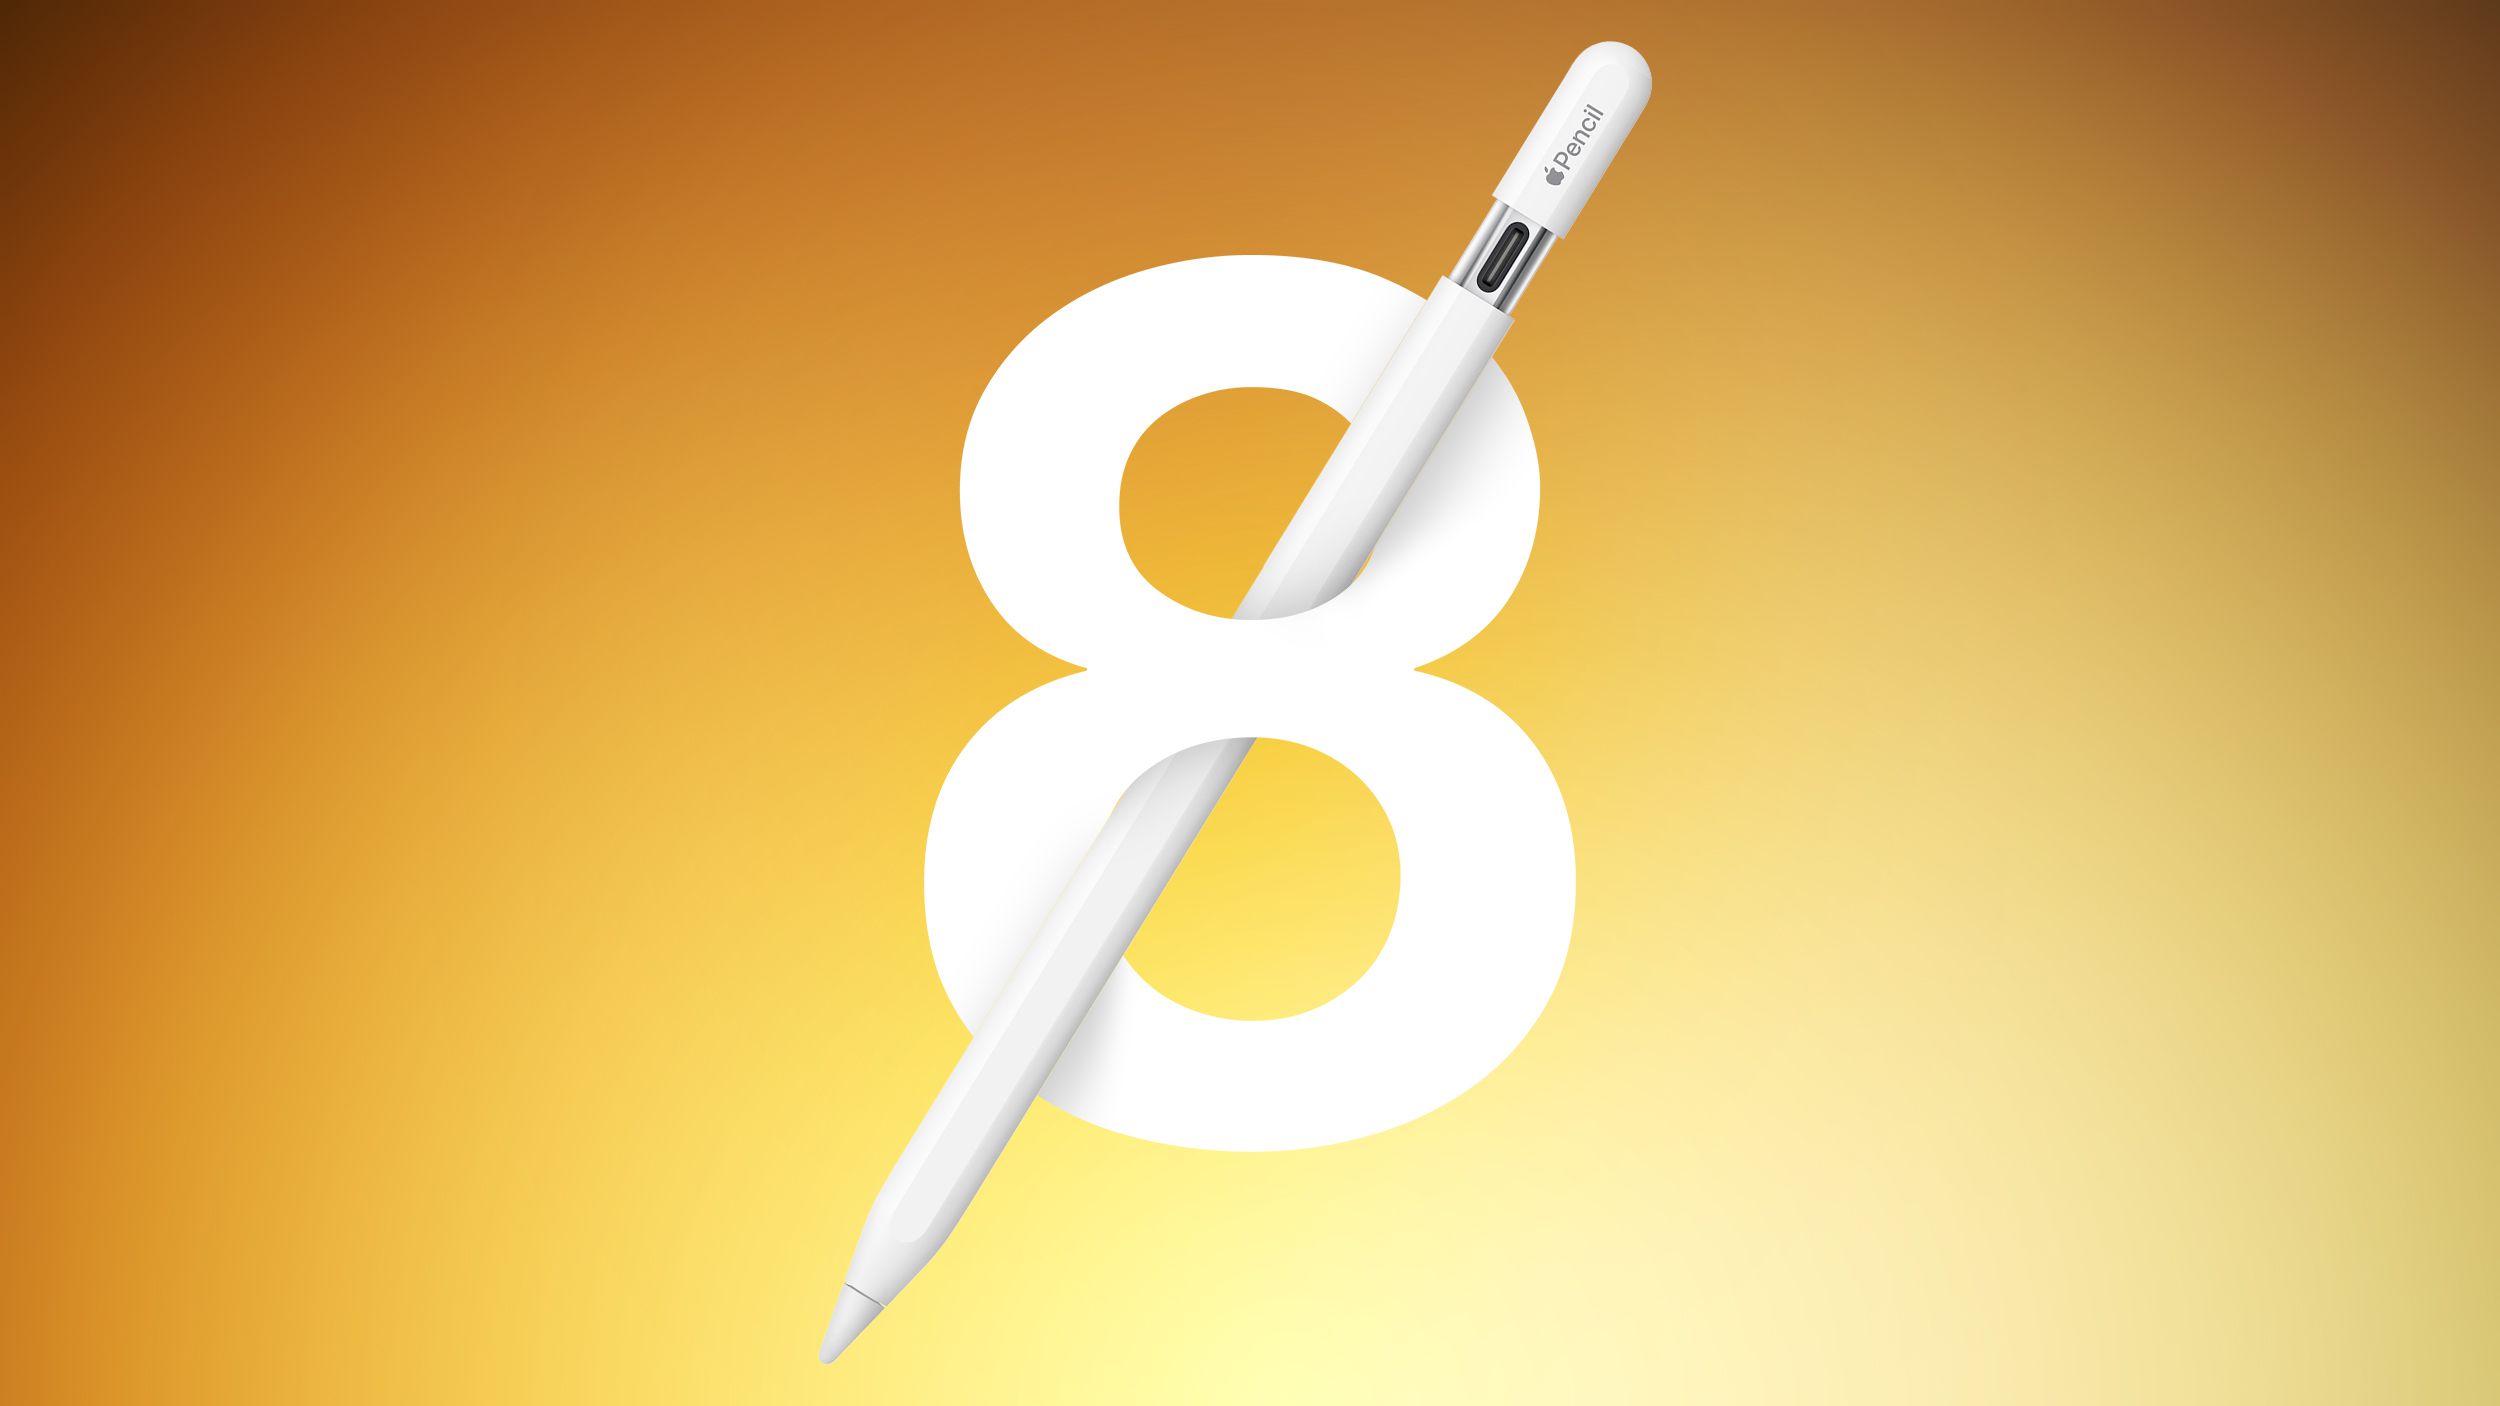 Apple Pencil Buyer's Guide: Which Model Should You Choose? - MacRumors